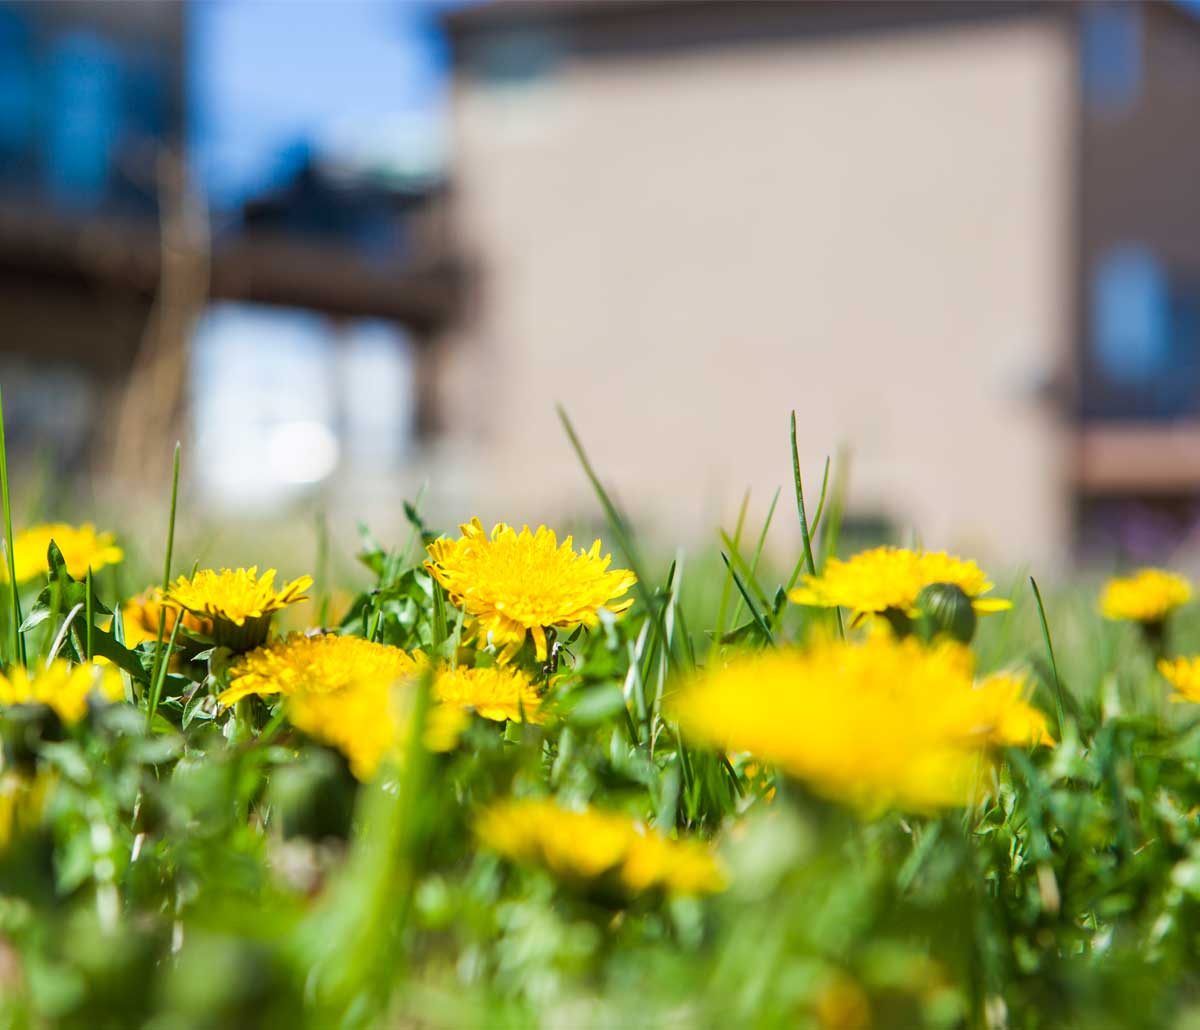 A close-up picture of Yellow Dandelions in the grass